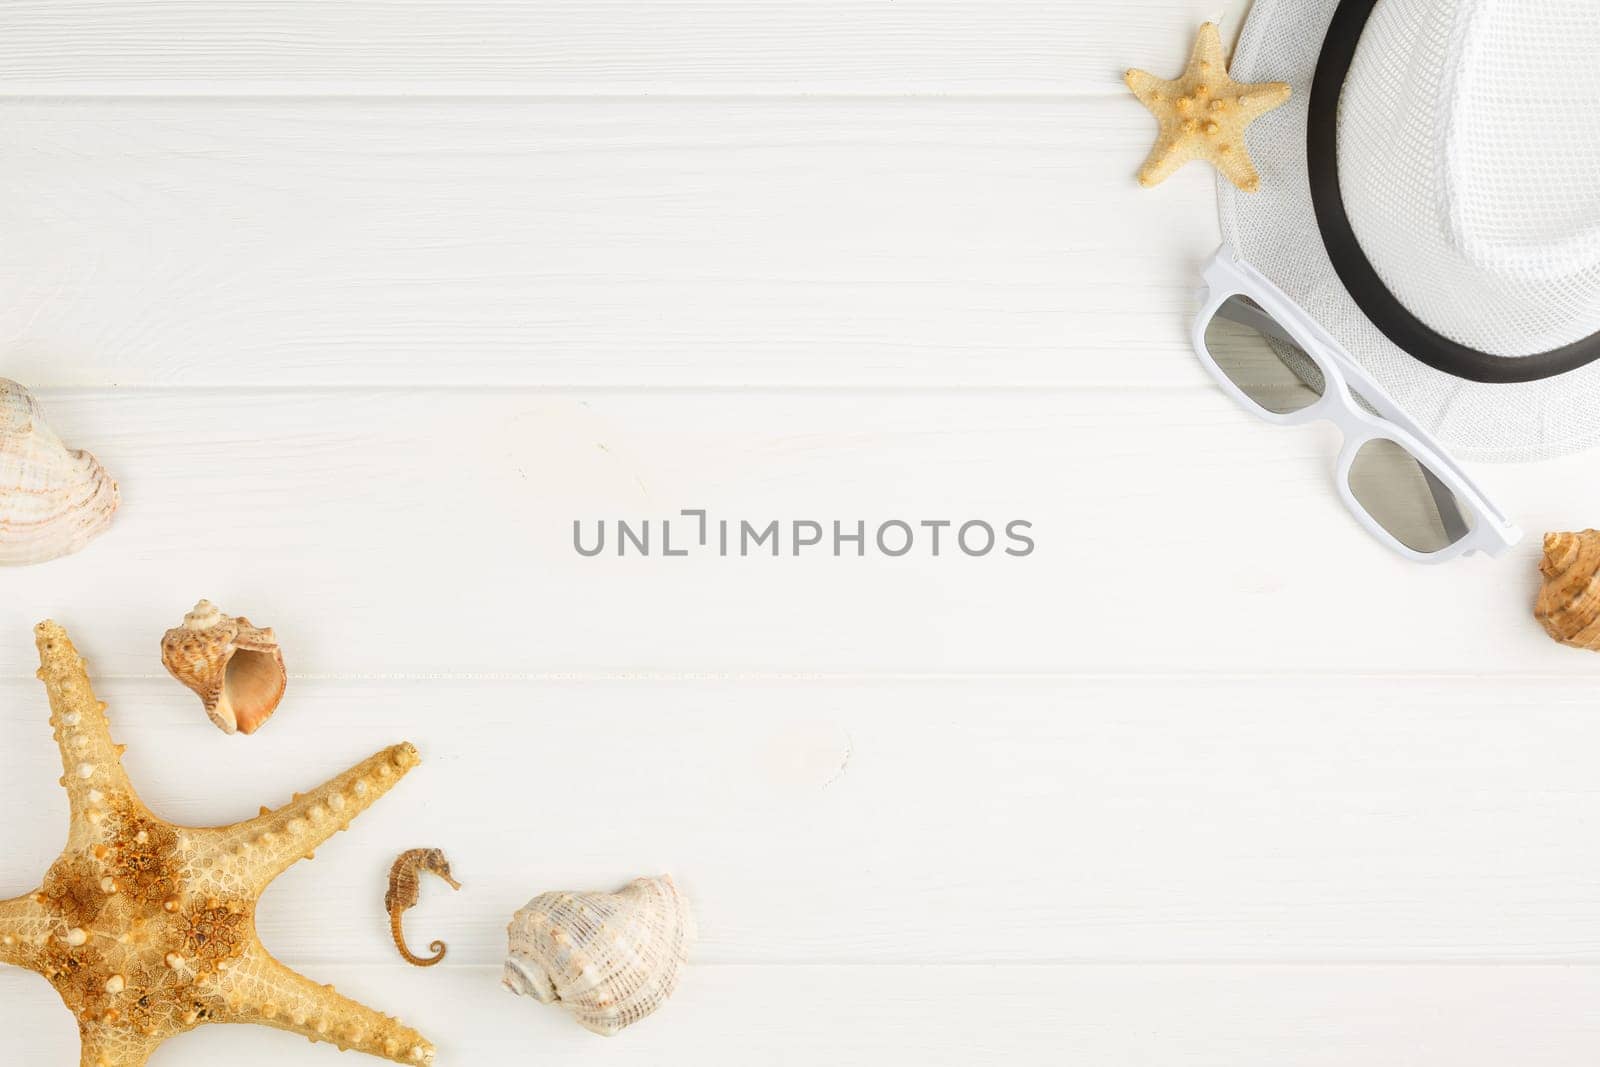 Summer hat with sunglasses on white wooden background. Flat lay. Beach vacation concept. Top view. Starfish and seashells.